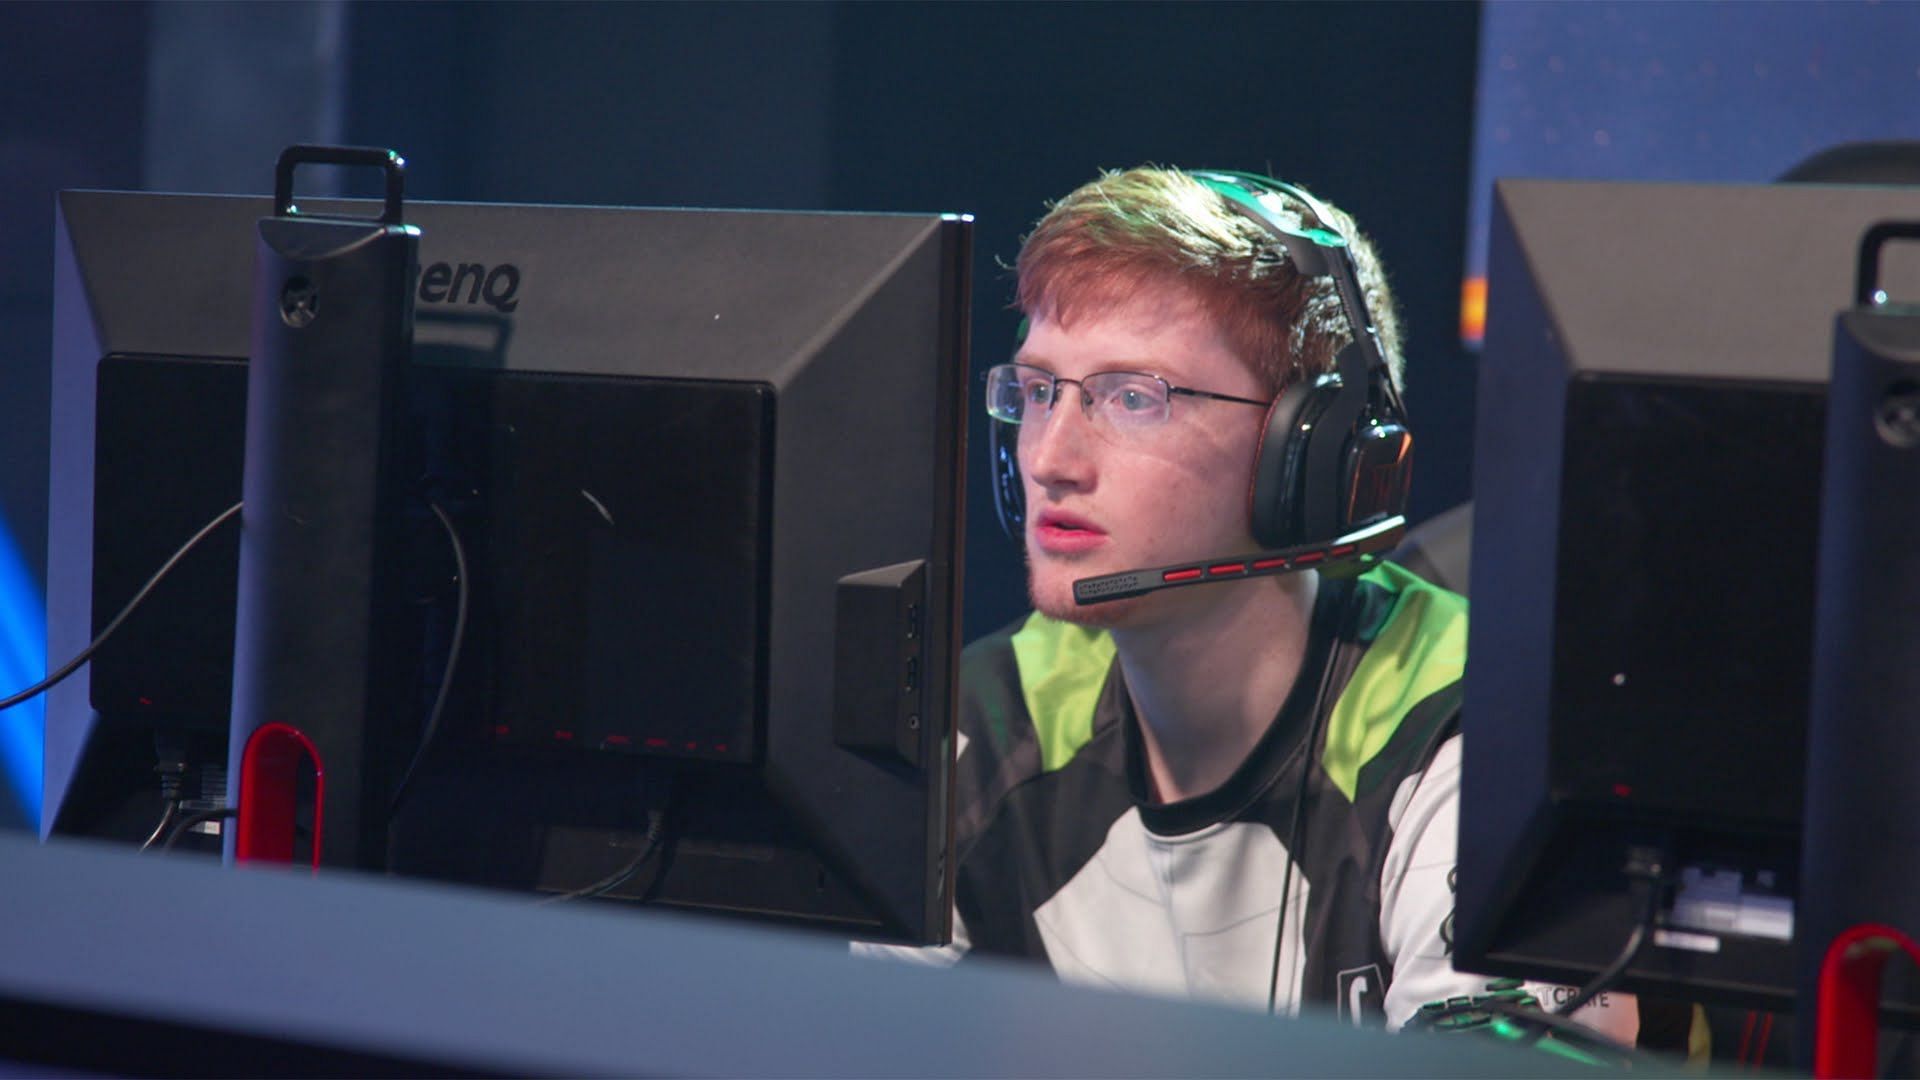 Scump wins $100k in a Call of Duty: Warzone tournament (Image via Twitter)